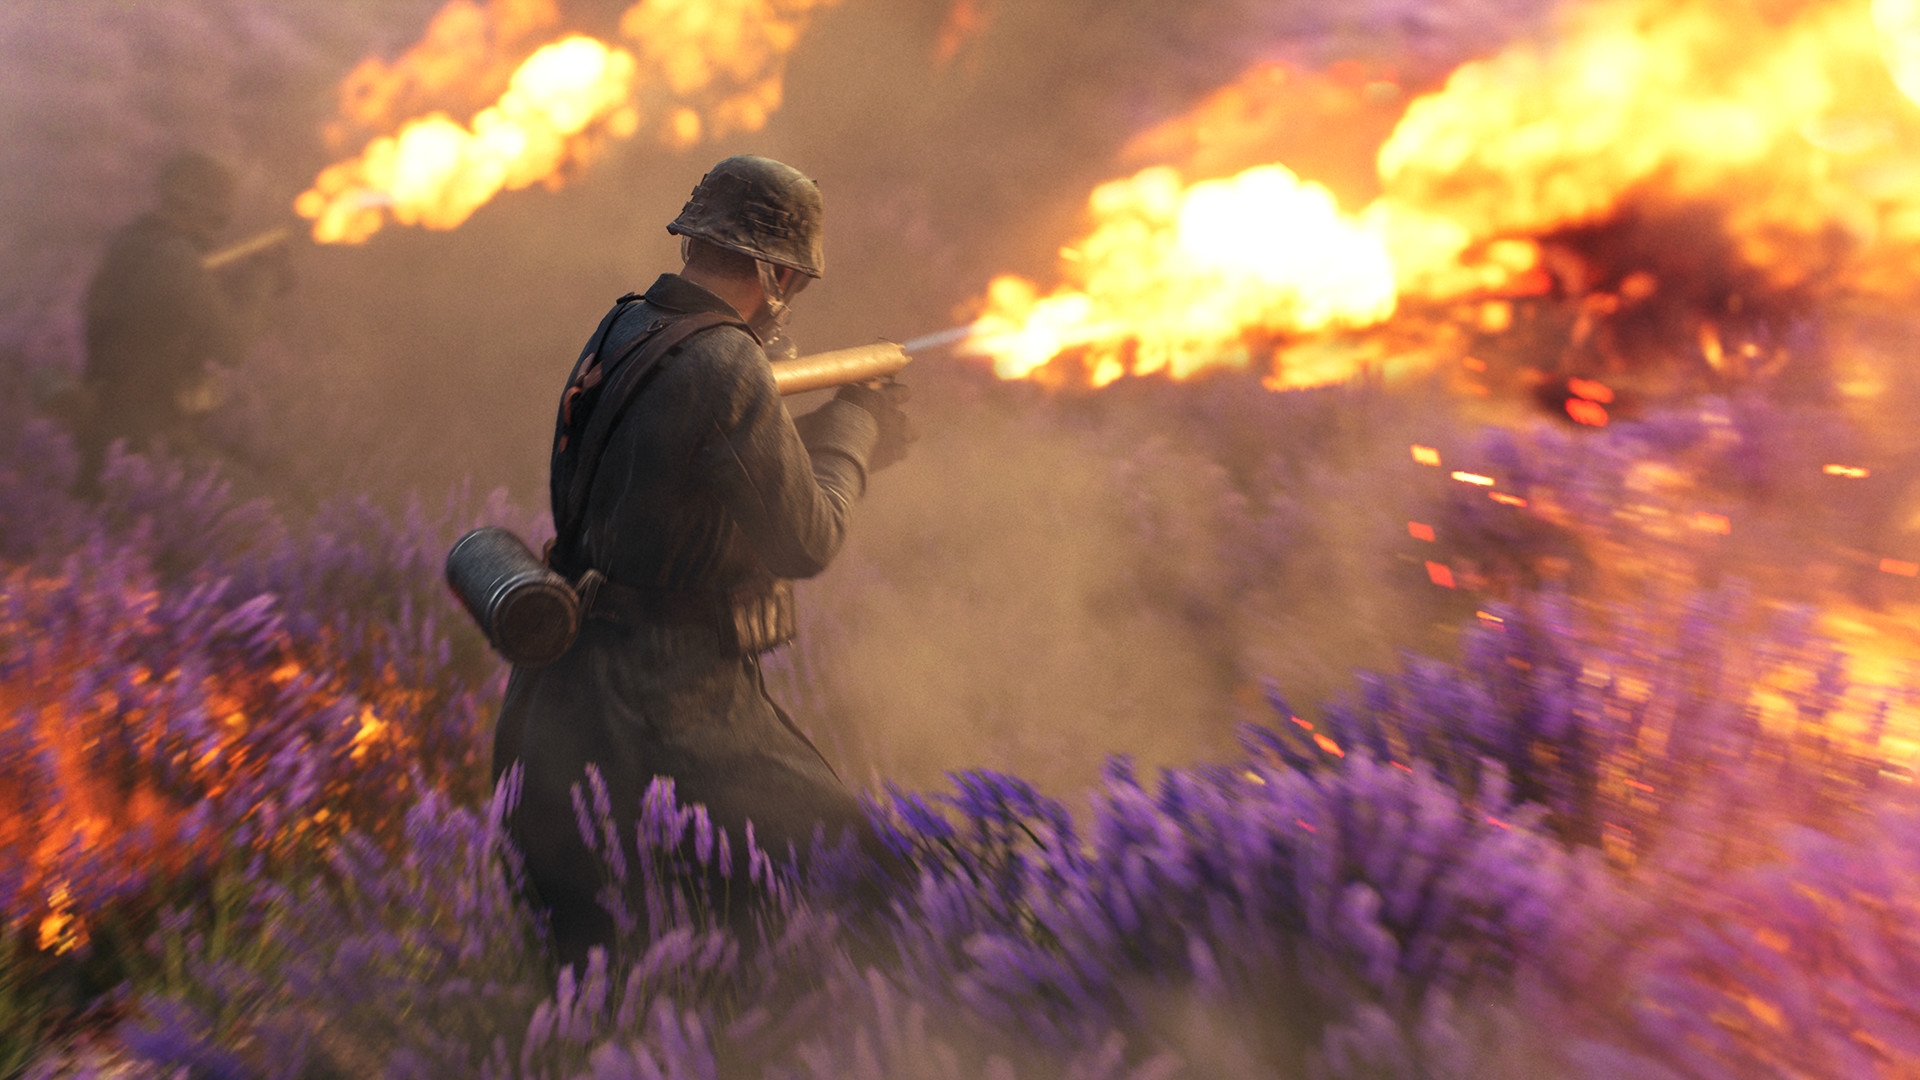 Today, we'll be covering the Battlefield games system requirements for all the games through 1 to 5, so you can know if your PC is up to the task. 